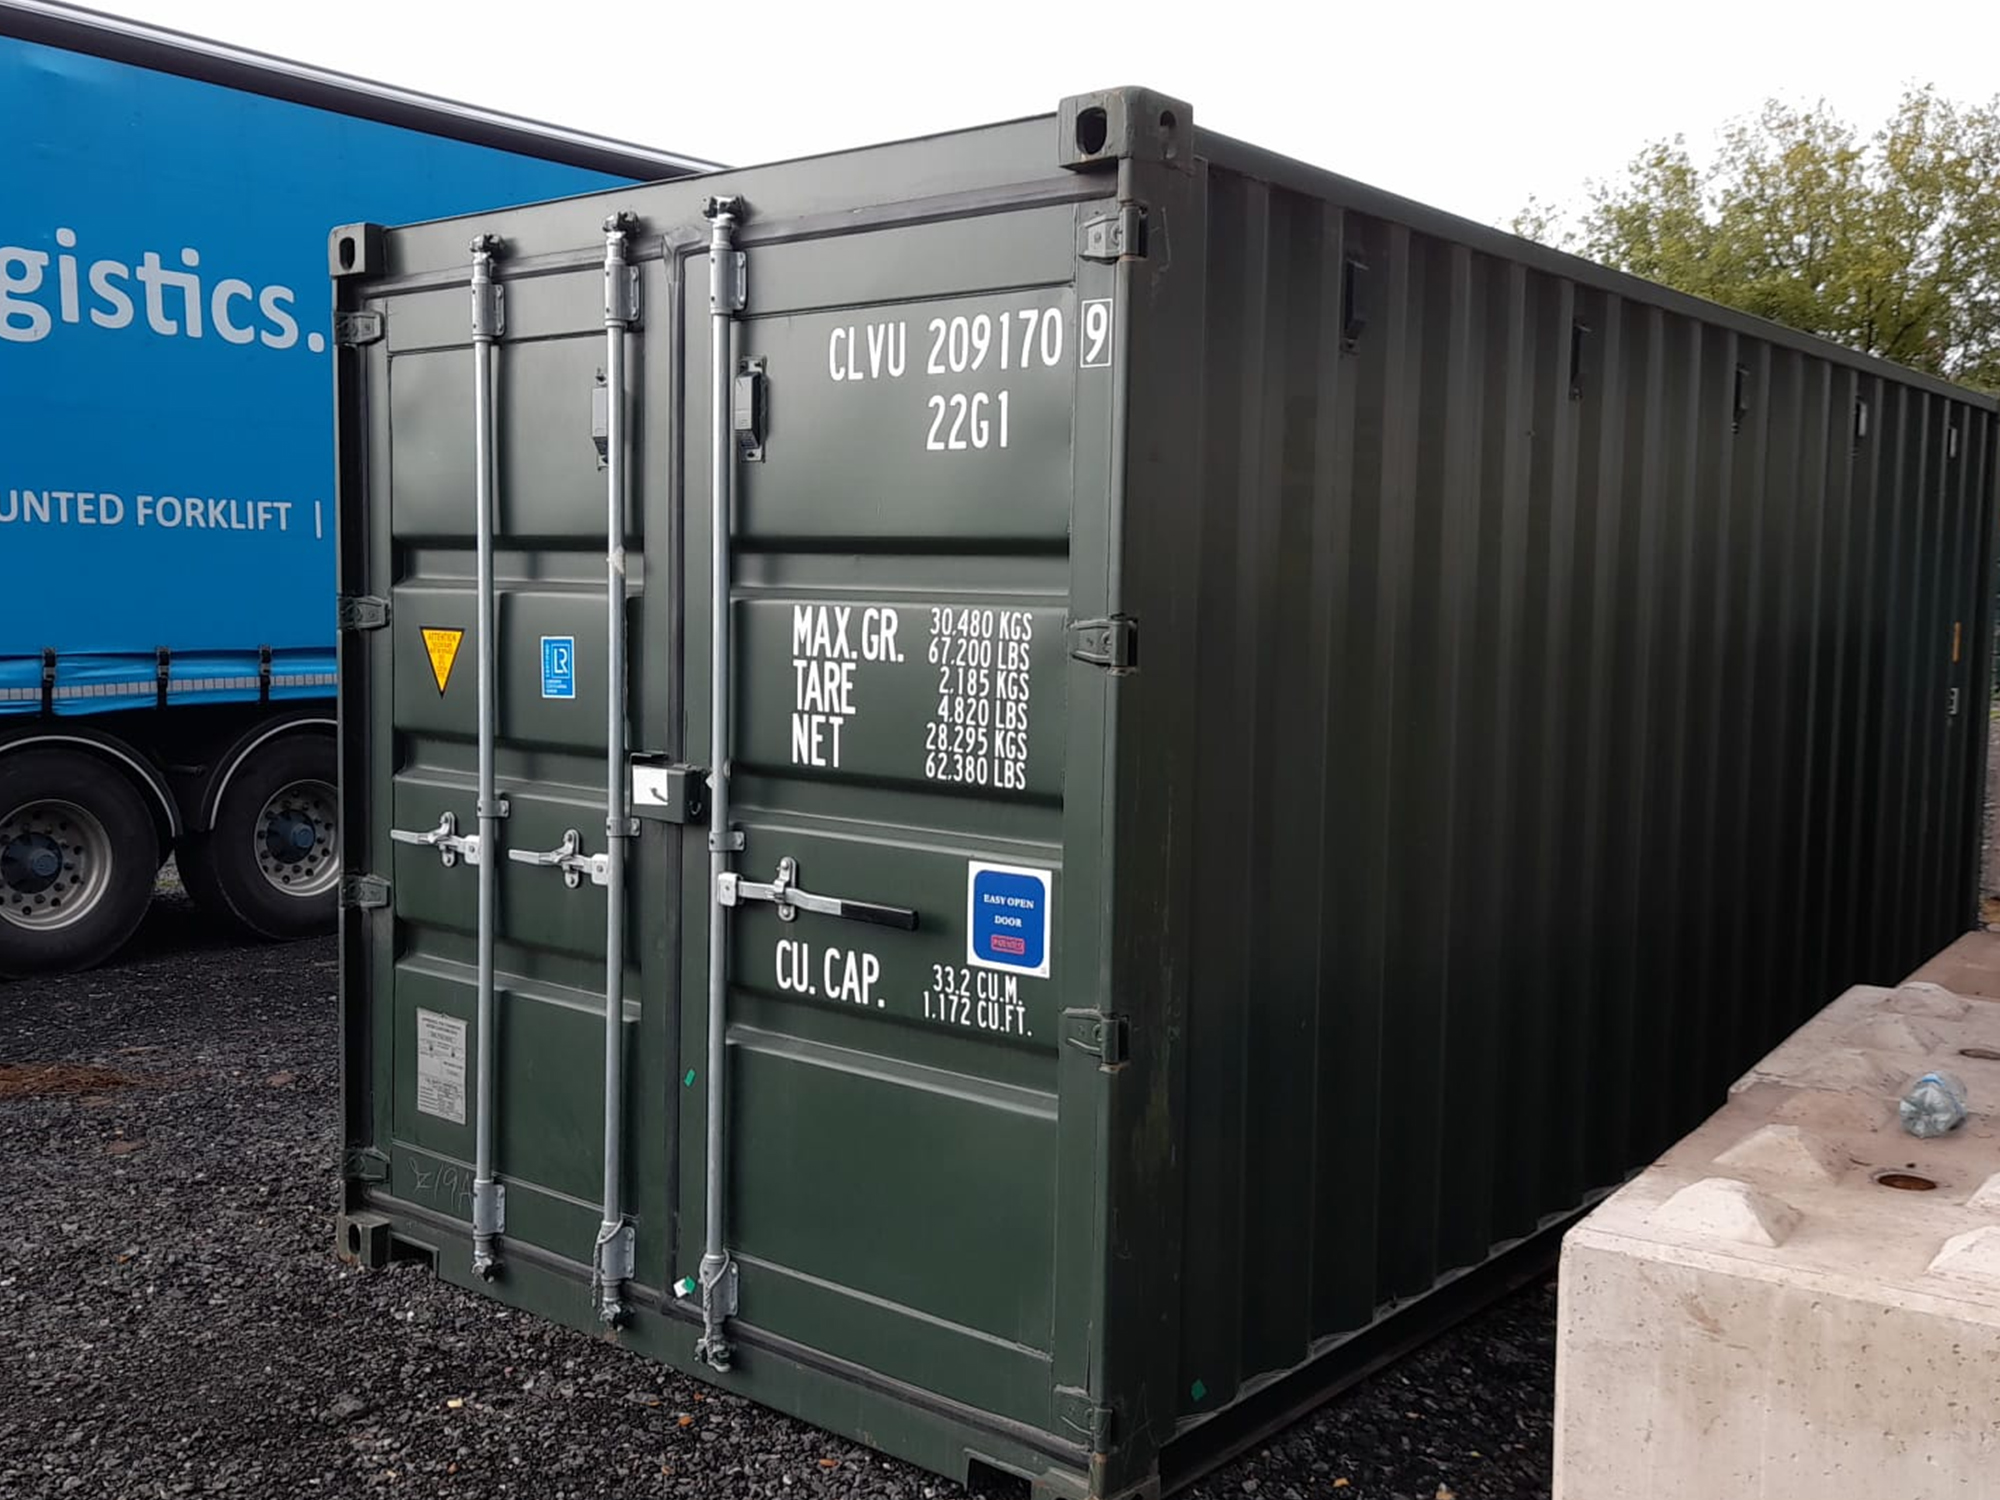 10ft Storage Container